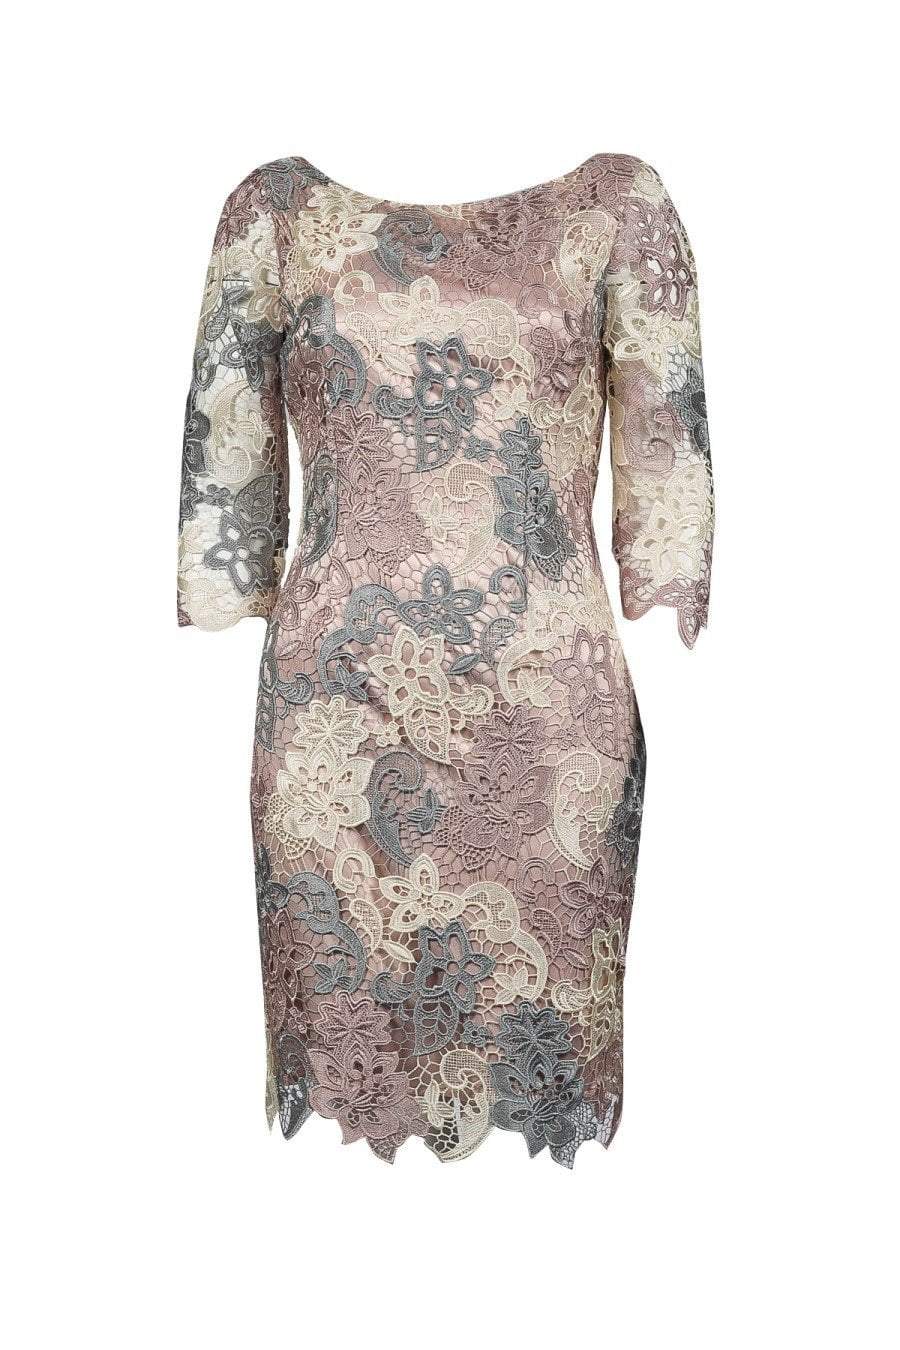 Eliza J Evening - EJ7M5417 Two Tone Lace Jewel Neck Sheath Dress In Pink and Grey